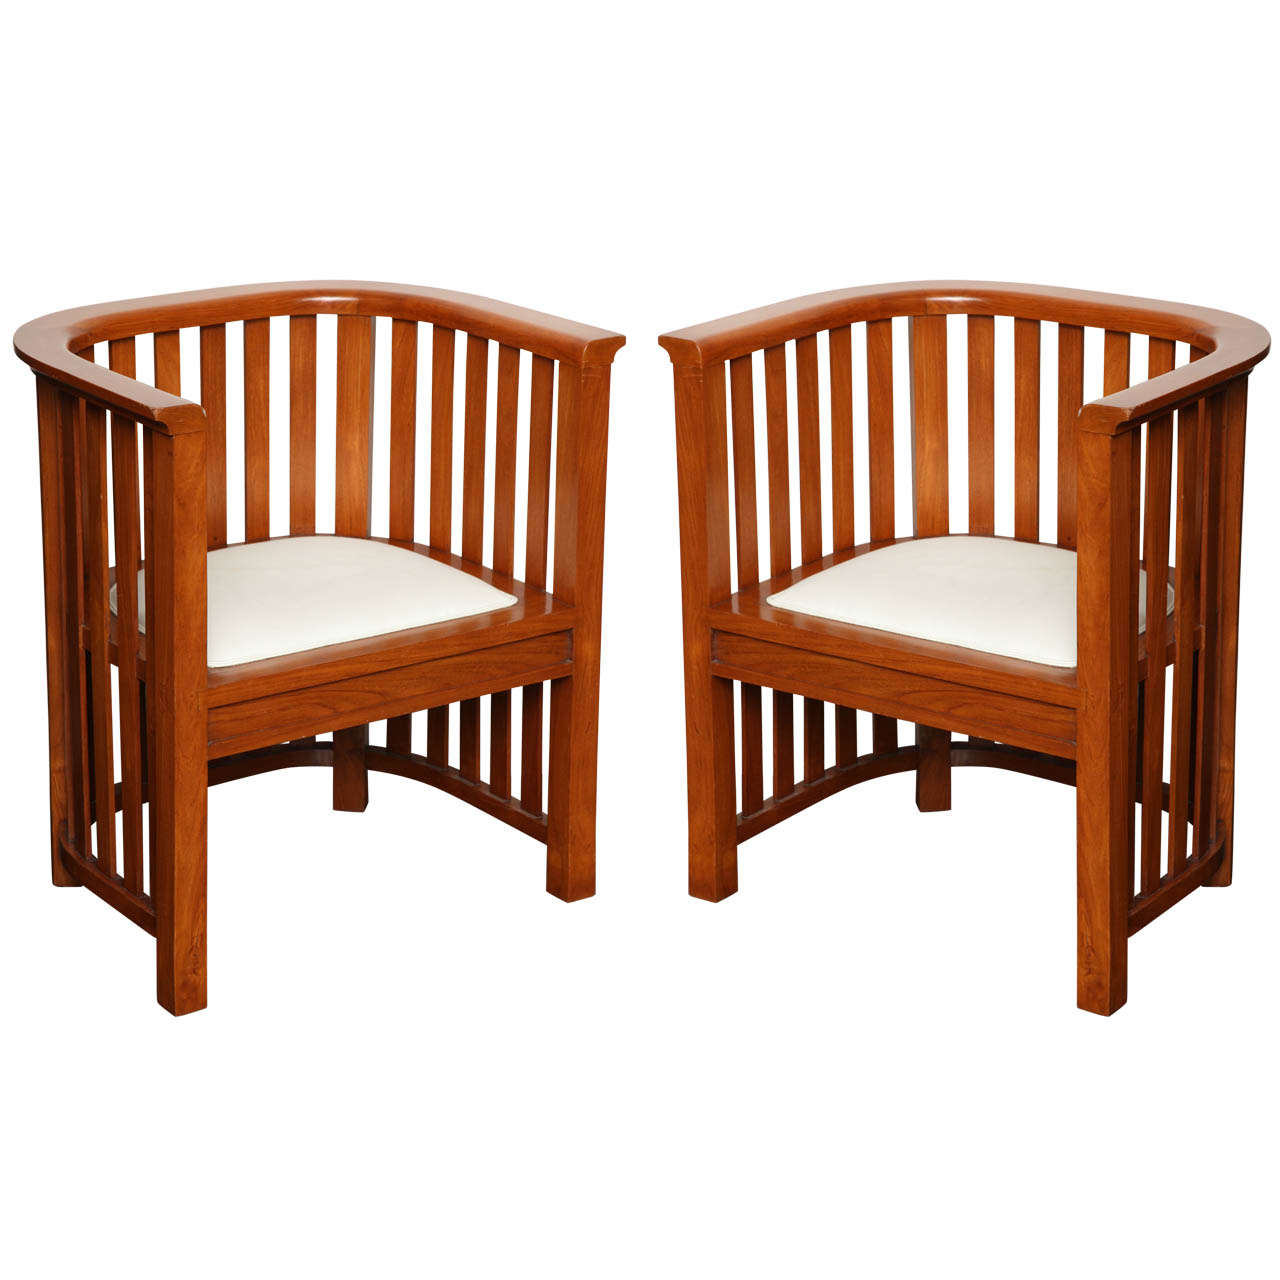 Pair of 20th Century Cherrywood Slatted Chairs For Sale